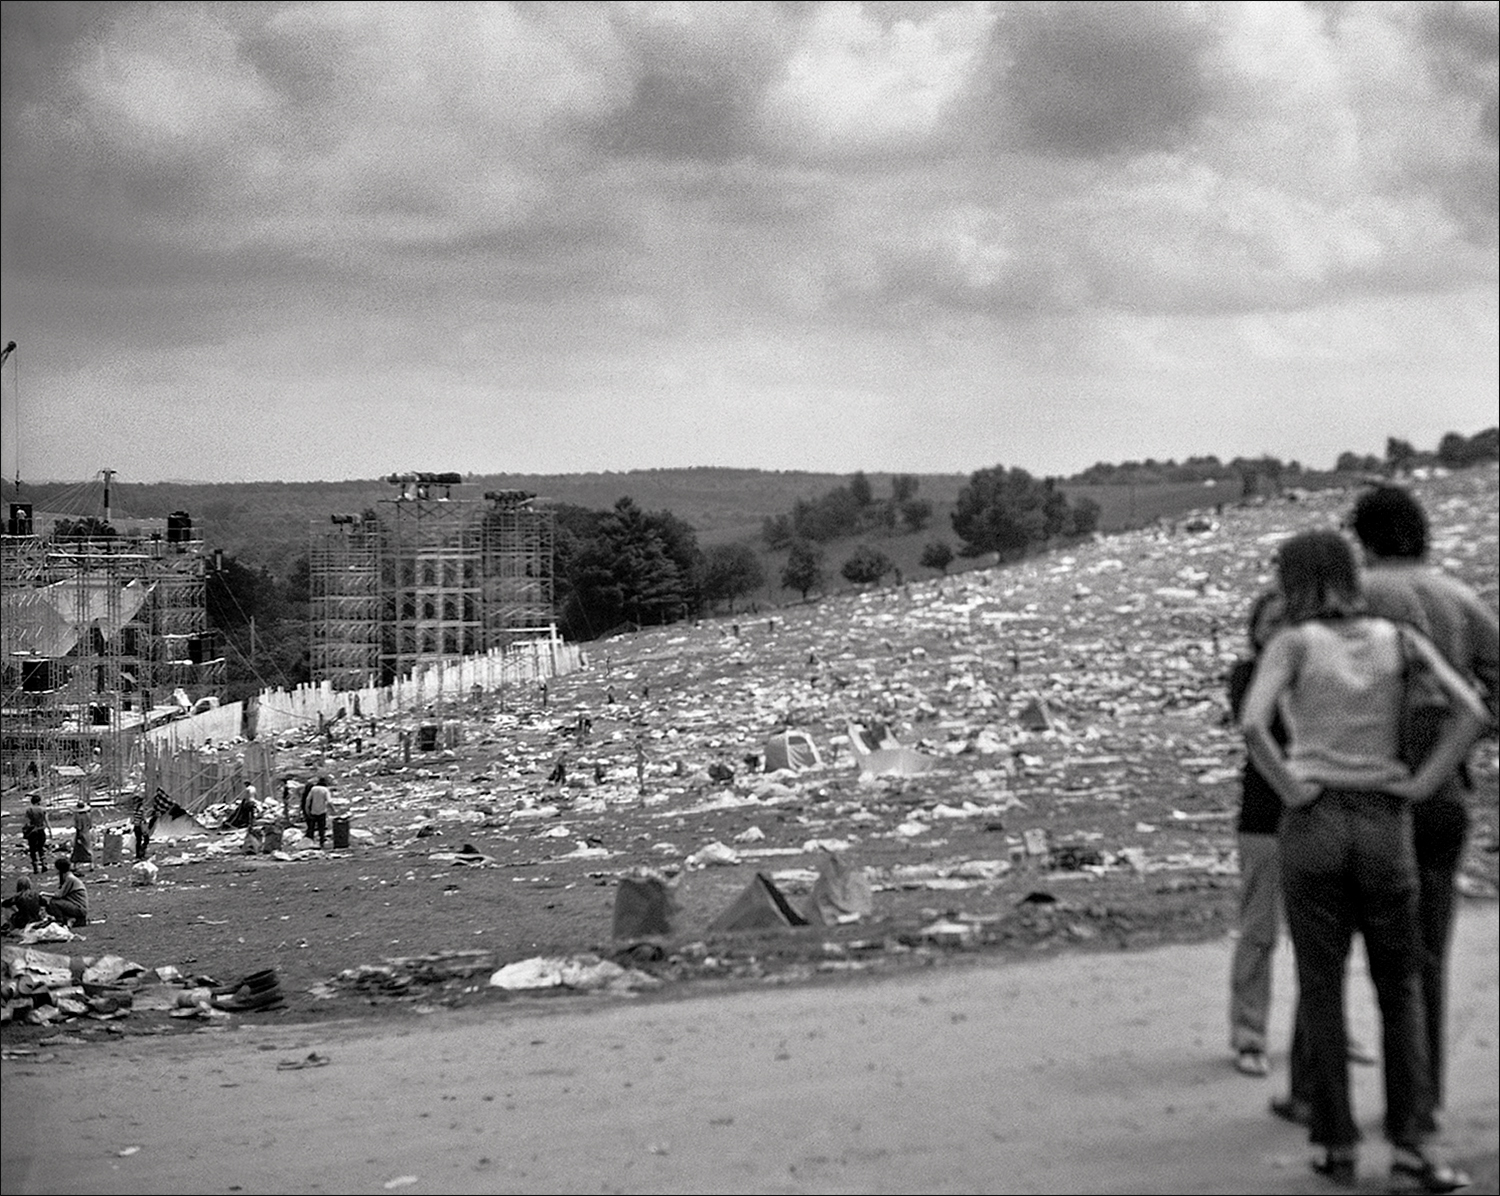 The Aftermath, Woodstock, 1969